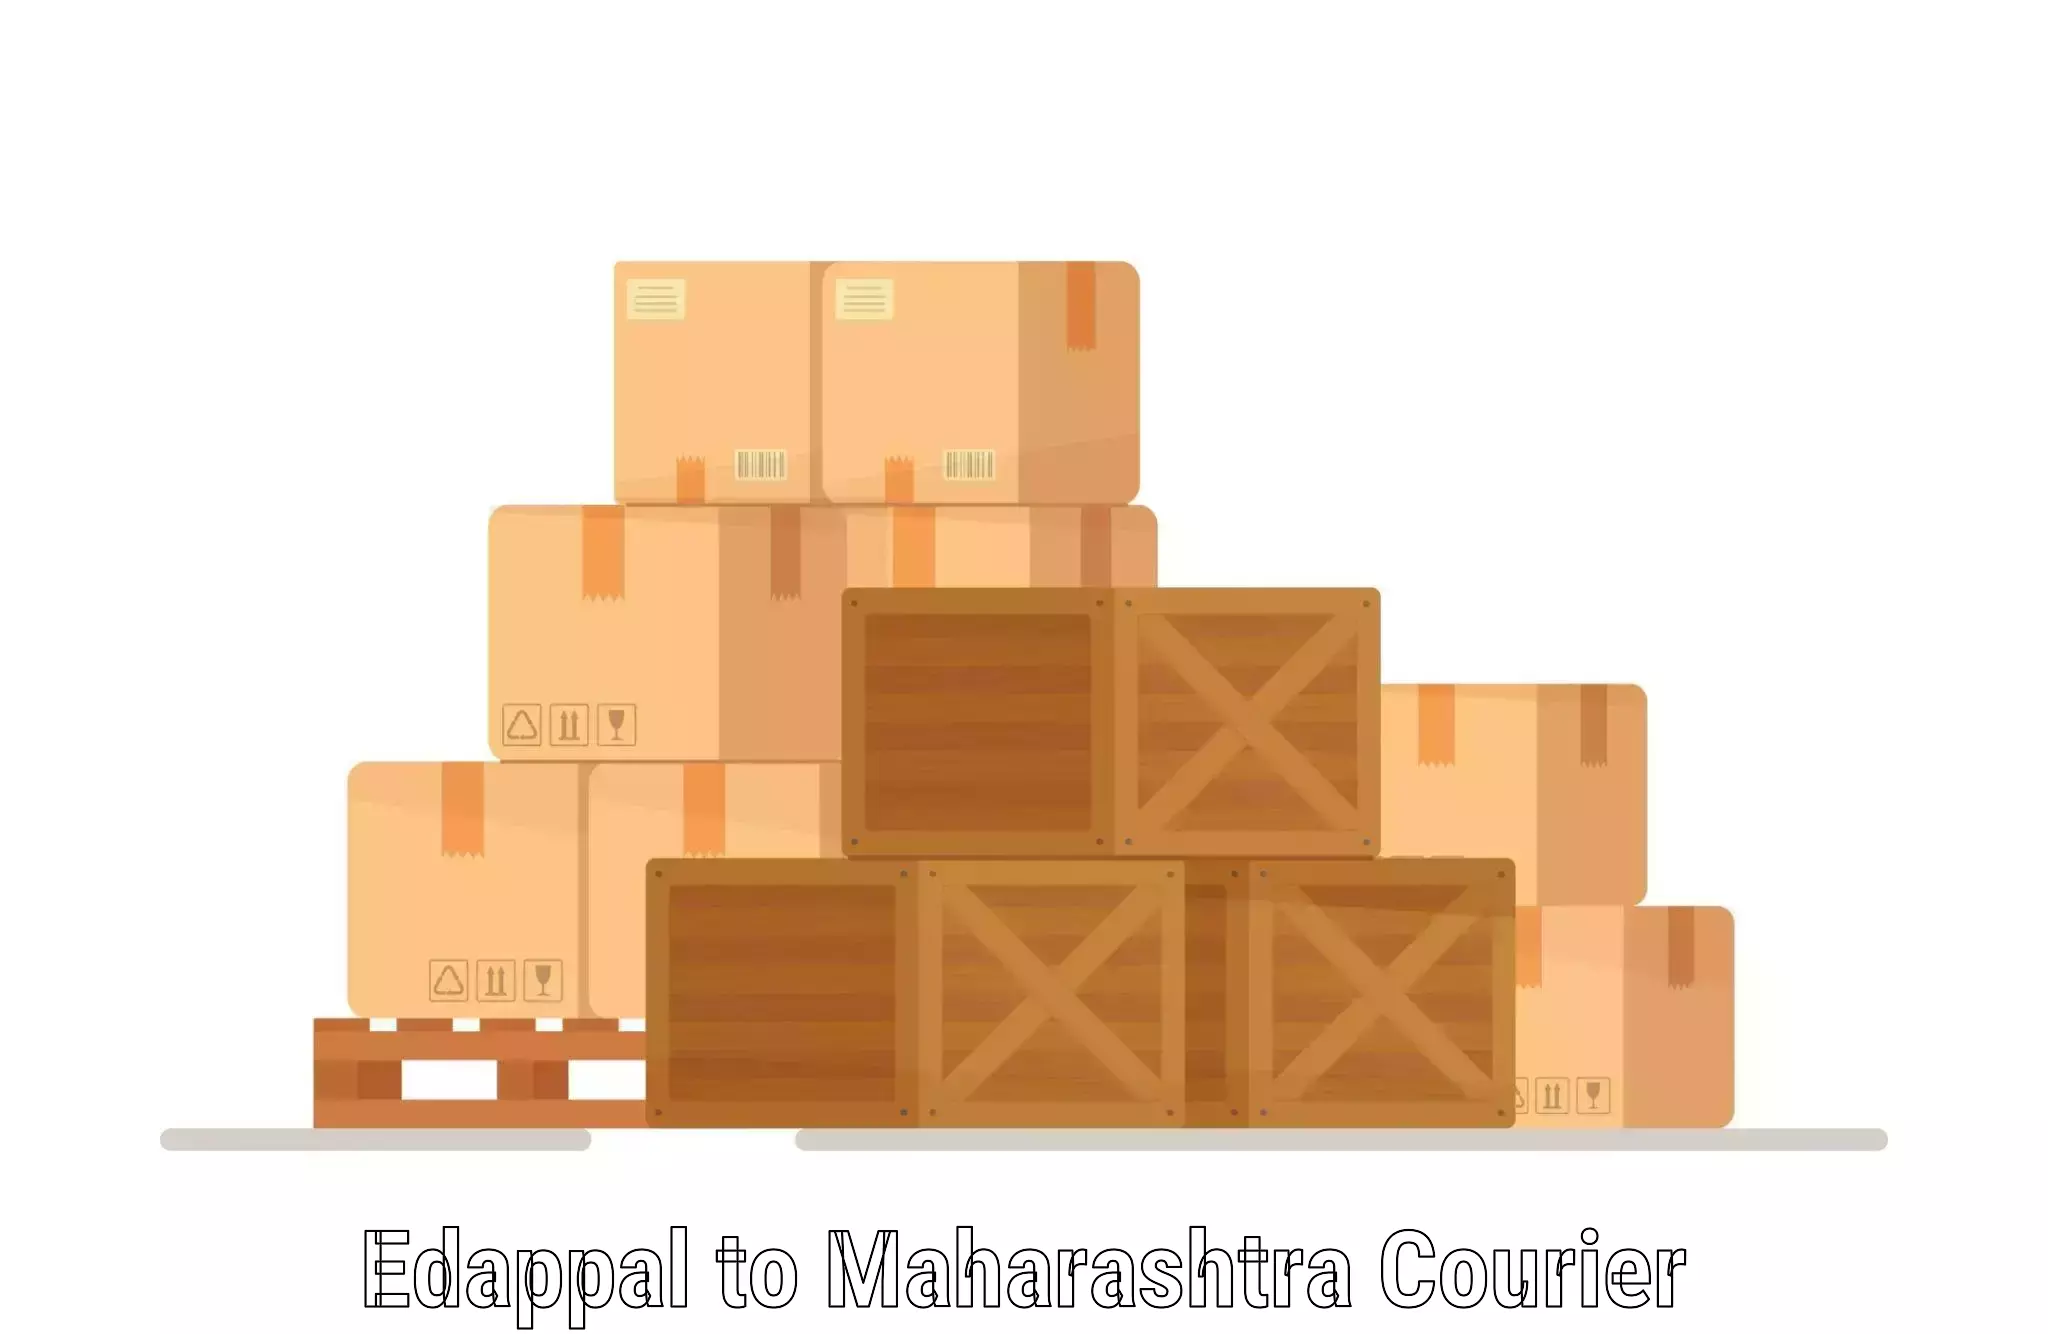 Courier service efficiency Edappal to Ojhar